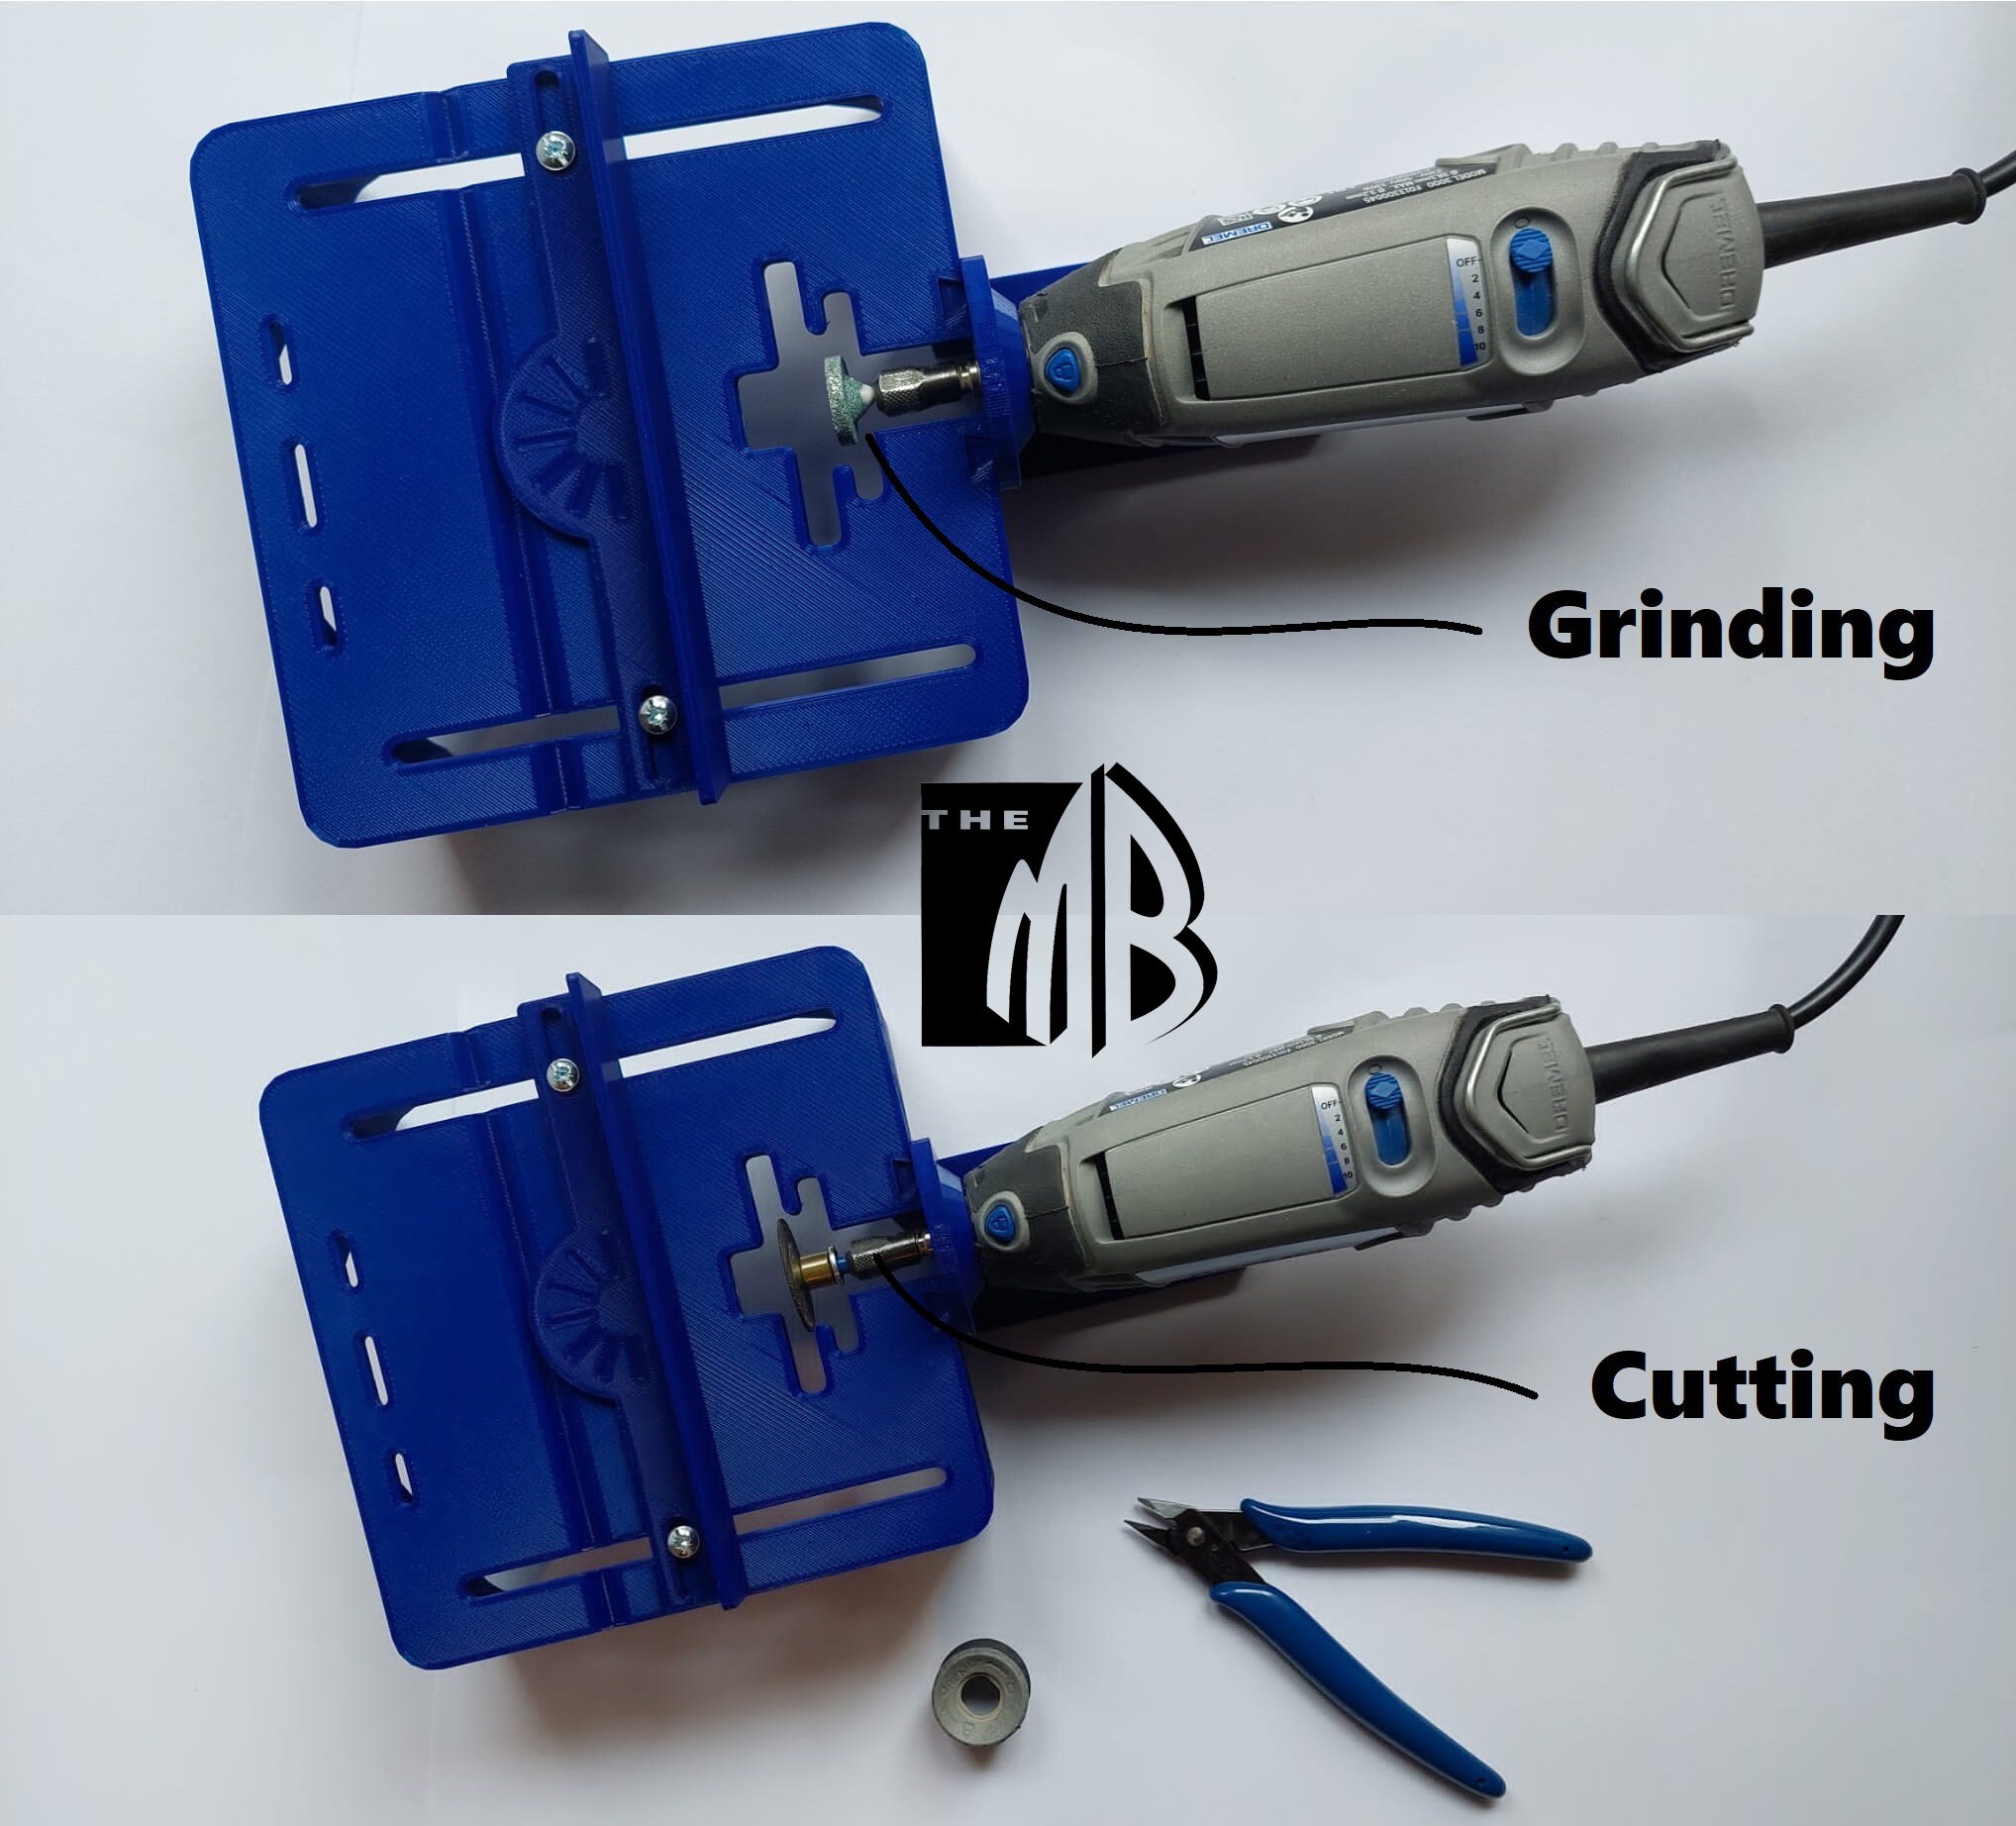 Dremel Rotary Tool WorkStation for Woodworking and Jewelry Making